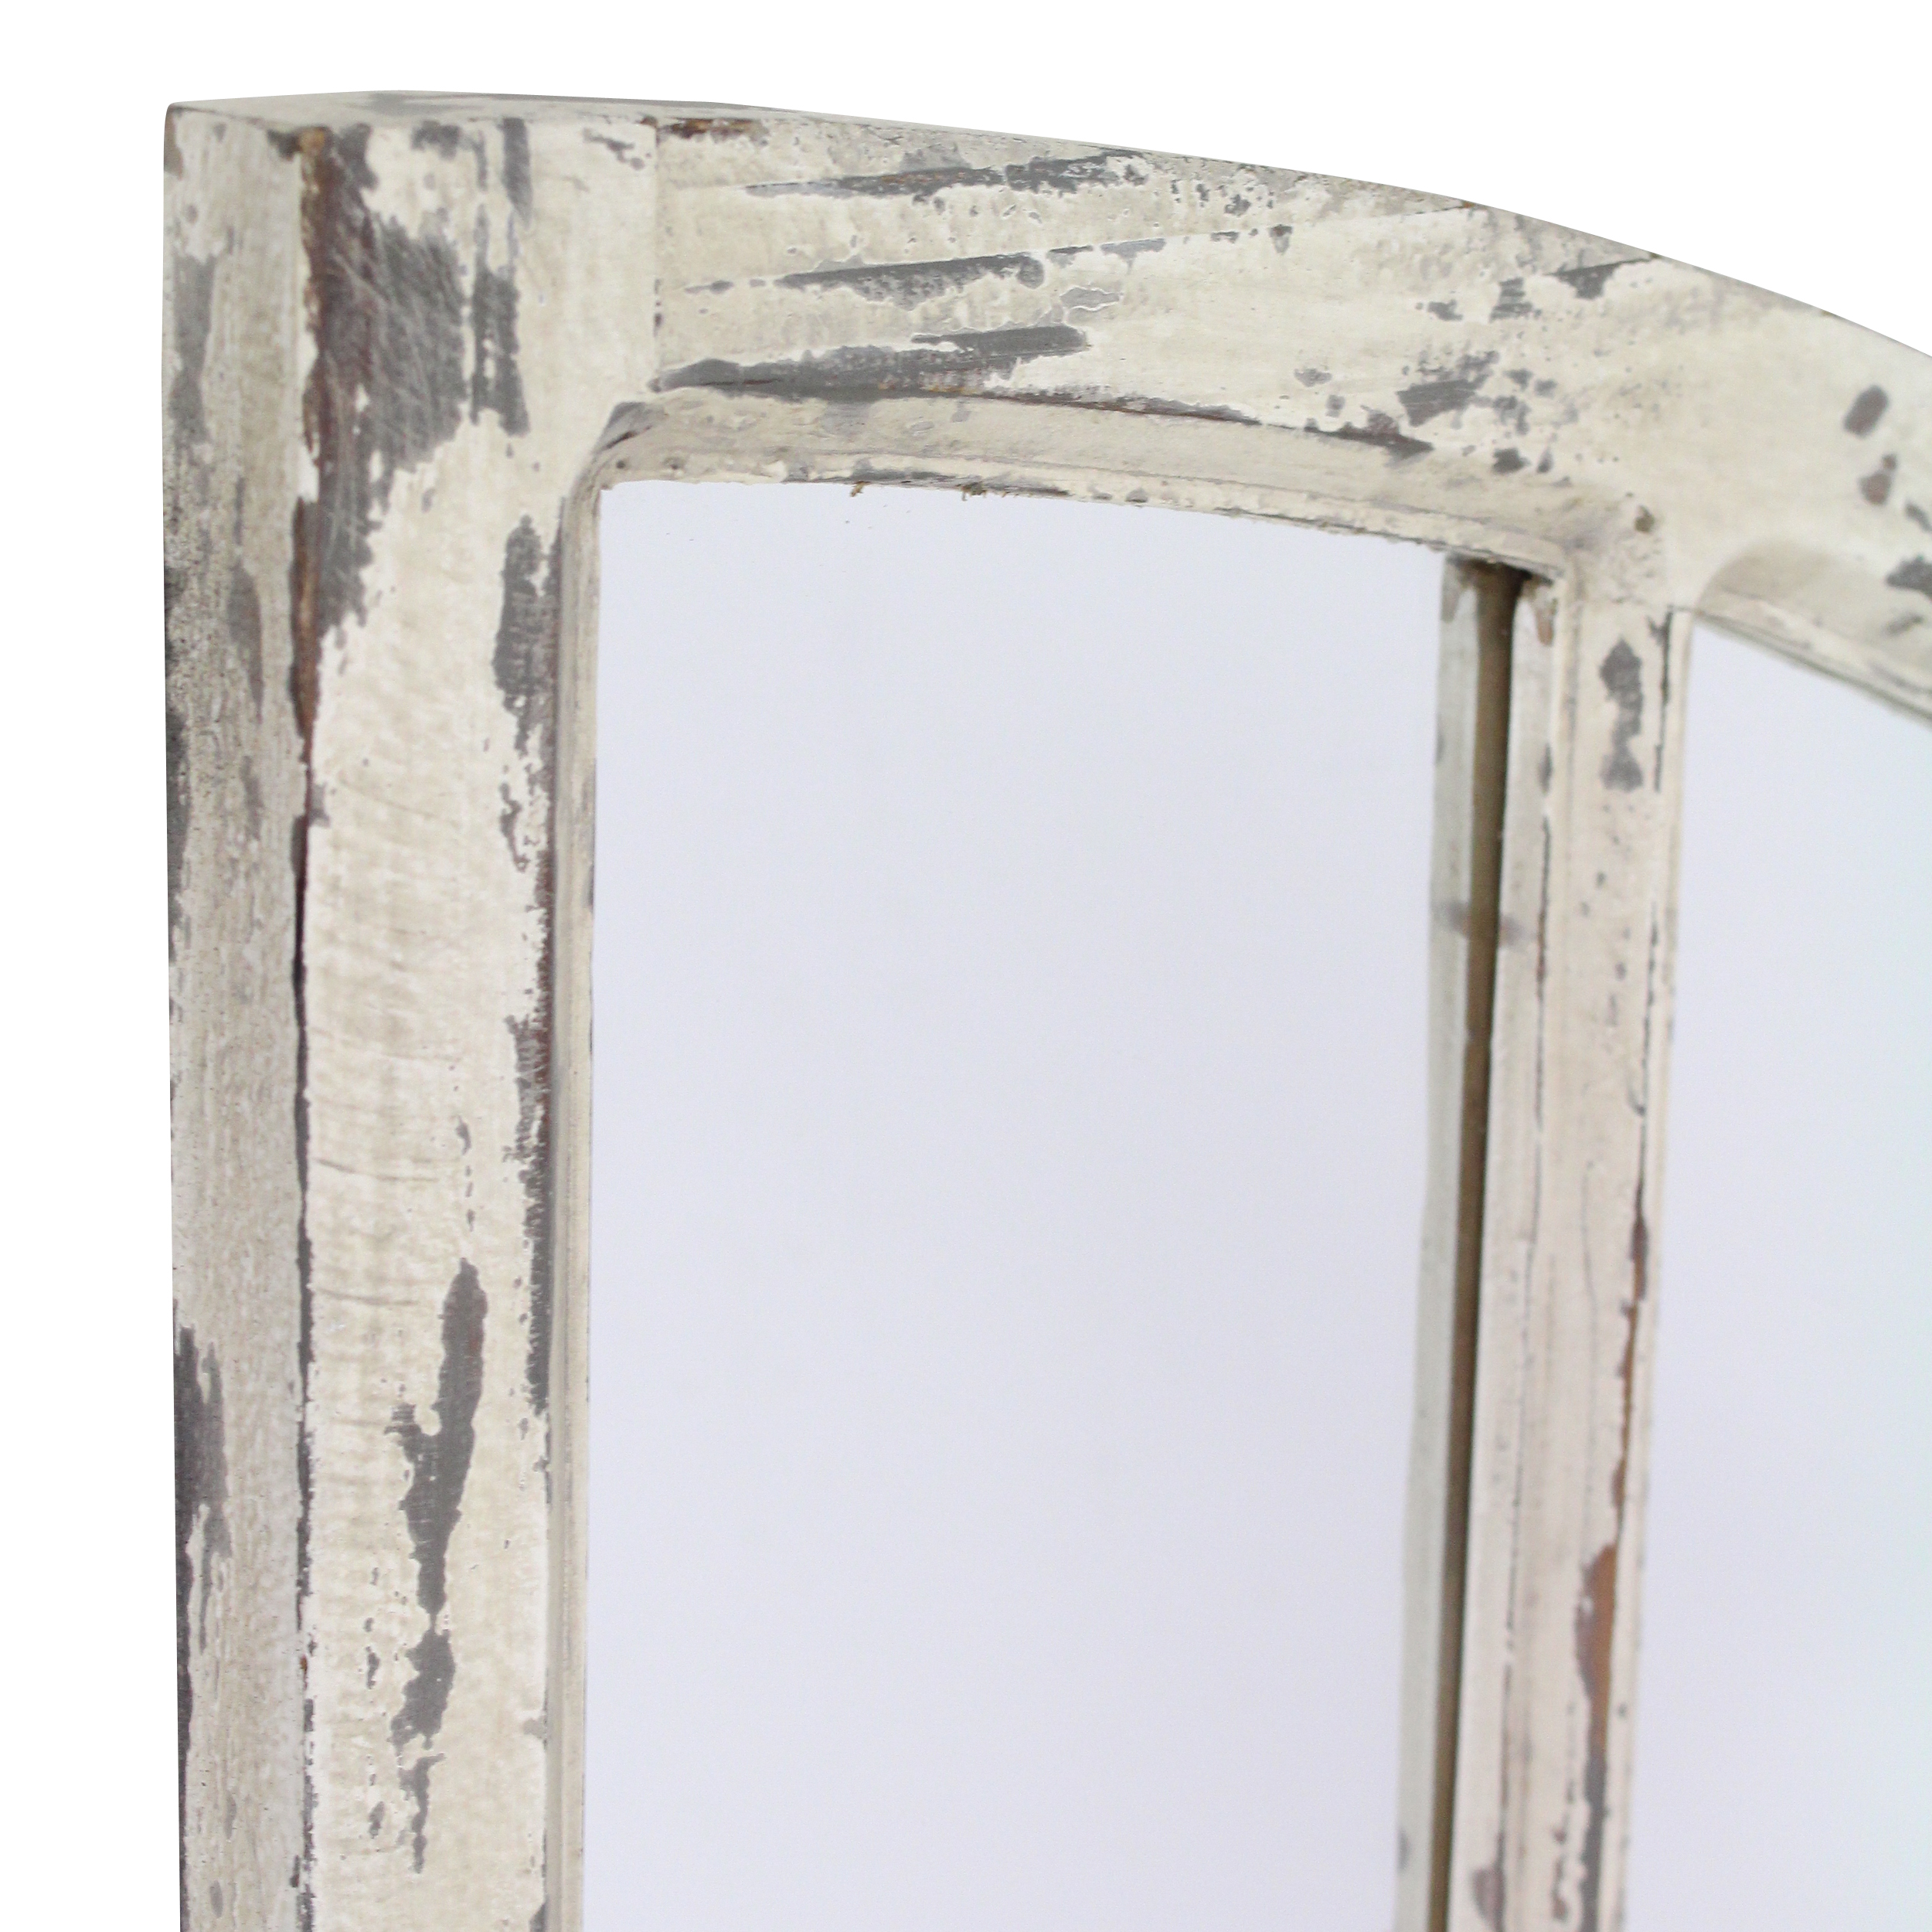 Jolene Arch Window Pane Mirrors Off-White 27" x 15" (Set of 2) by Aspire - image 4 of 6